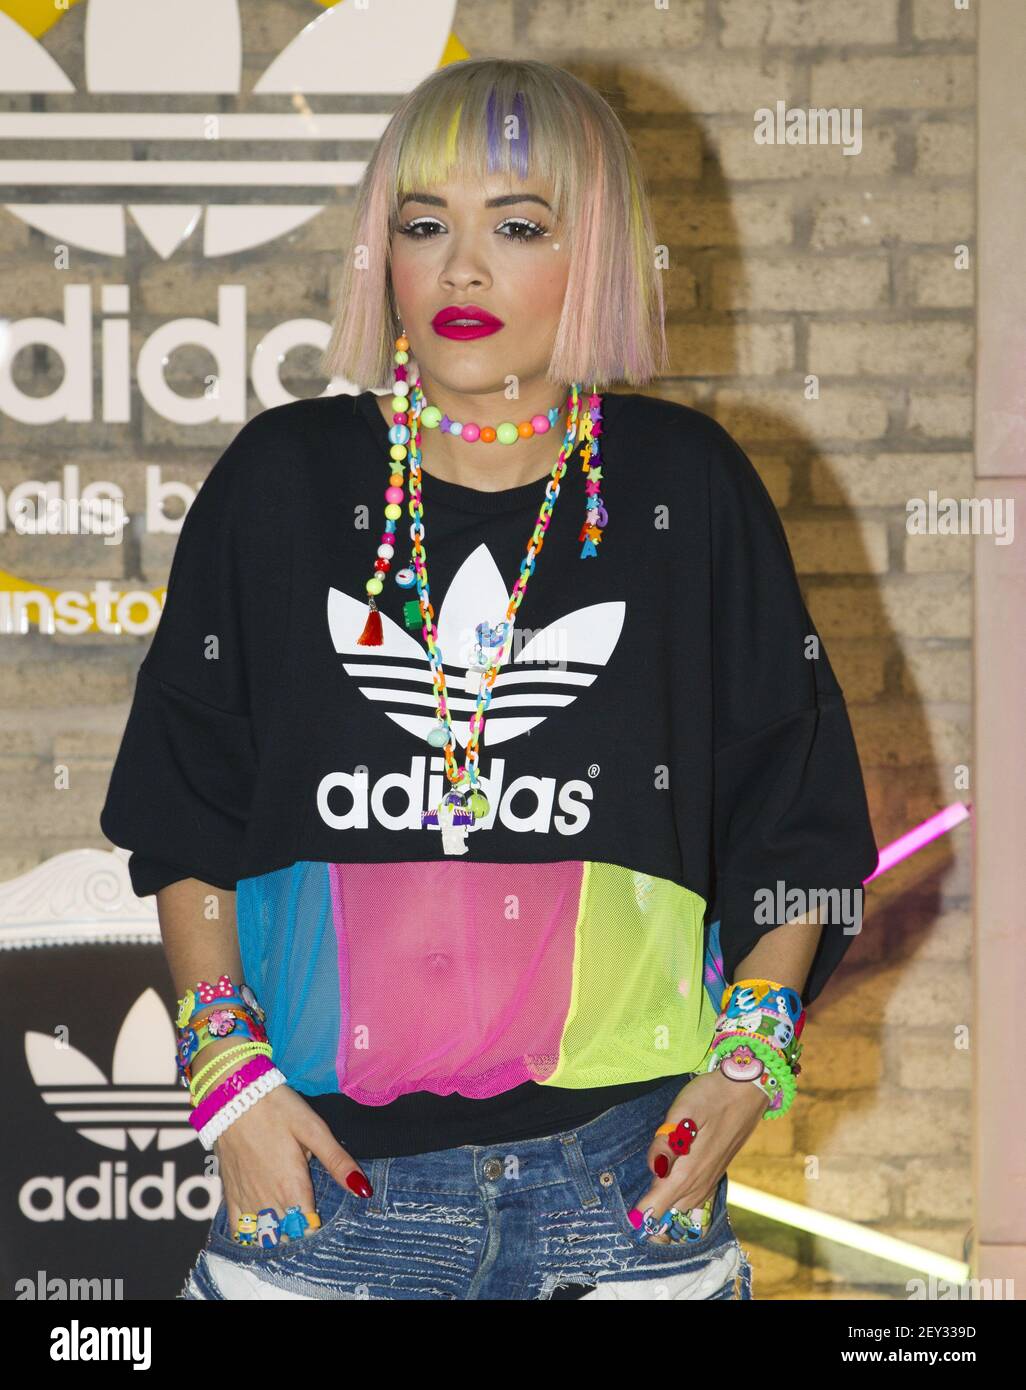 23 September 2014 - Seoul, South Korea - British singer and actress Rita  Ora attends a photo call for the "Originals by Rita Ora" collection  launching event at Adidas originals flagship store